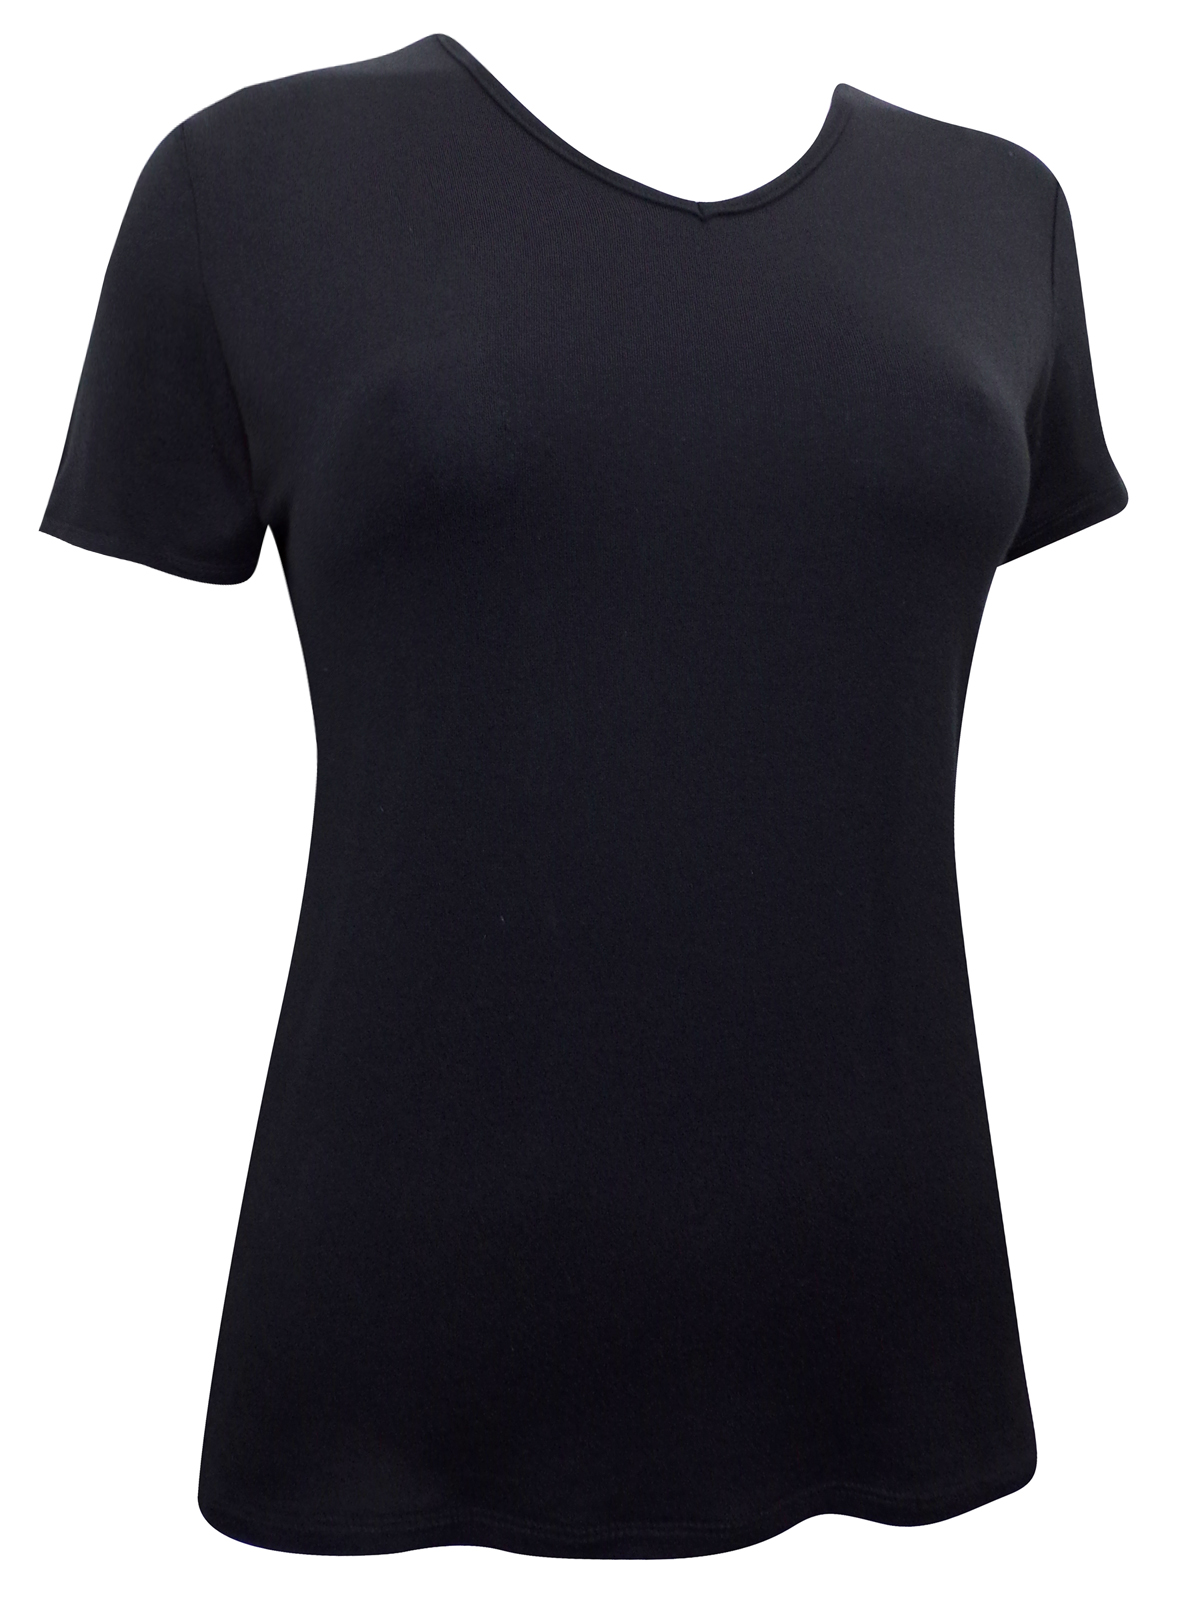 Beales - - Beales BLACK Short Sleeve Jersey T-Shirt - Size 10 to 18